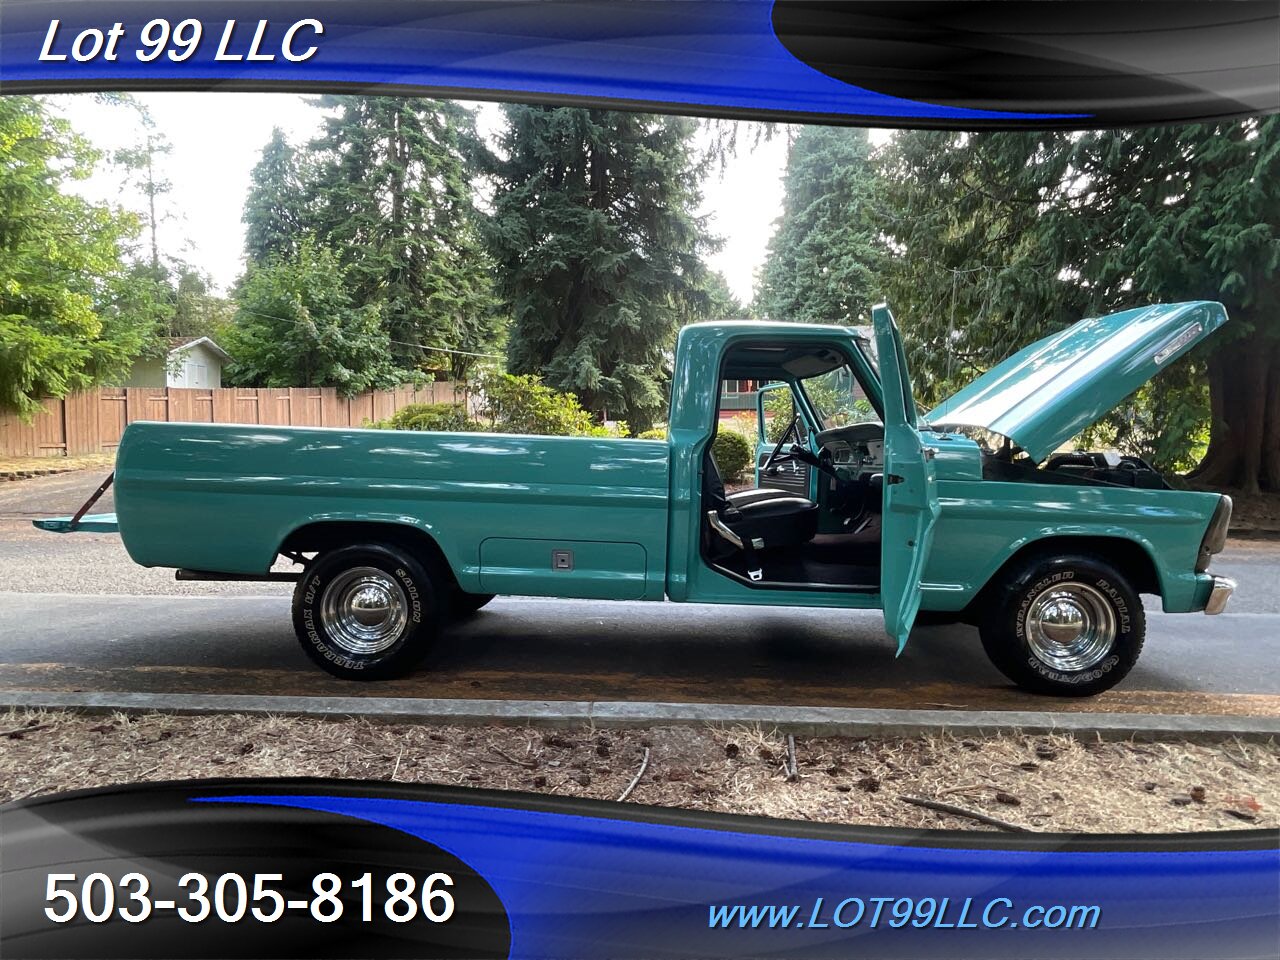 1967 Ford F-100 302 V8  Long Bed No Rust Solid Truck   - Photo 29 - Milwaukie, OR 97267